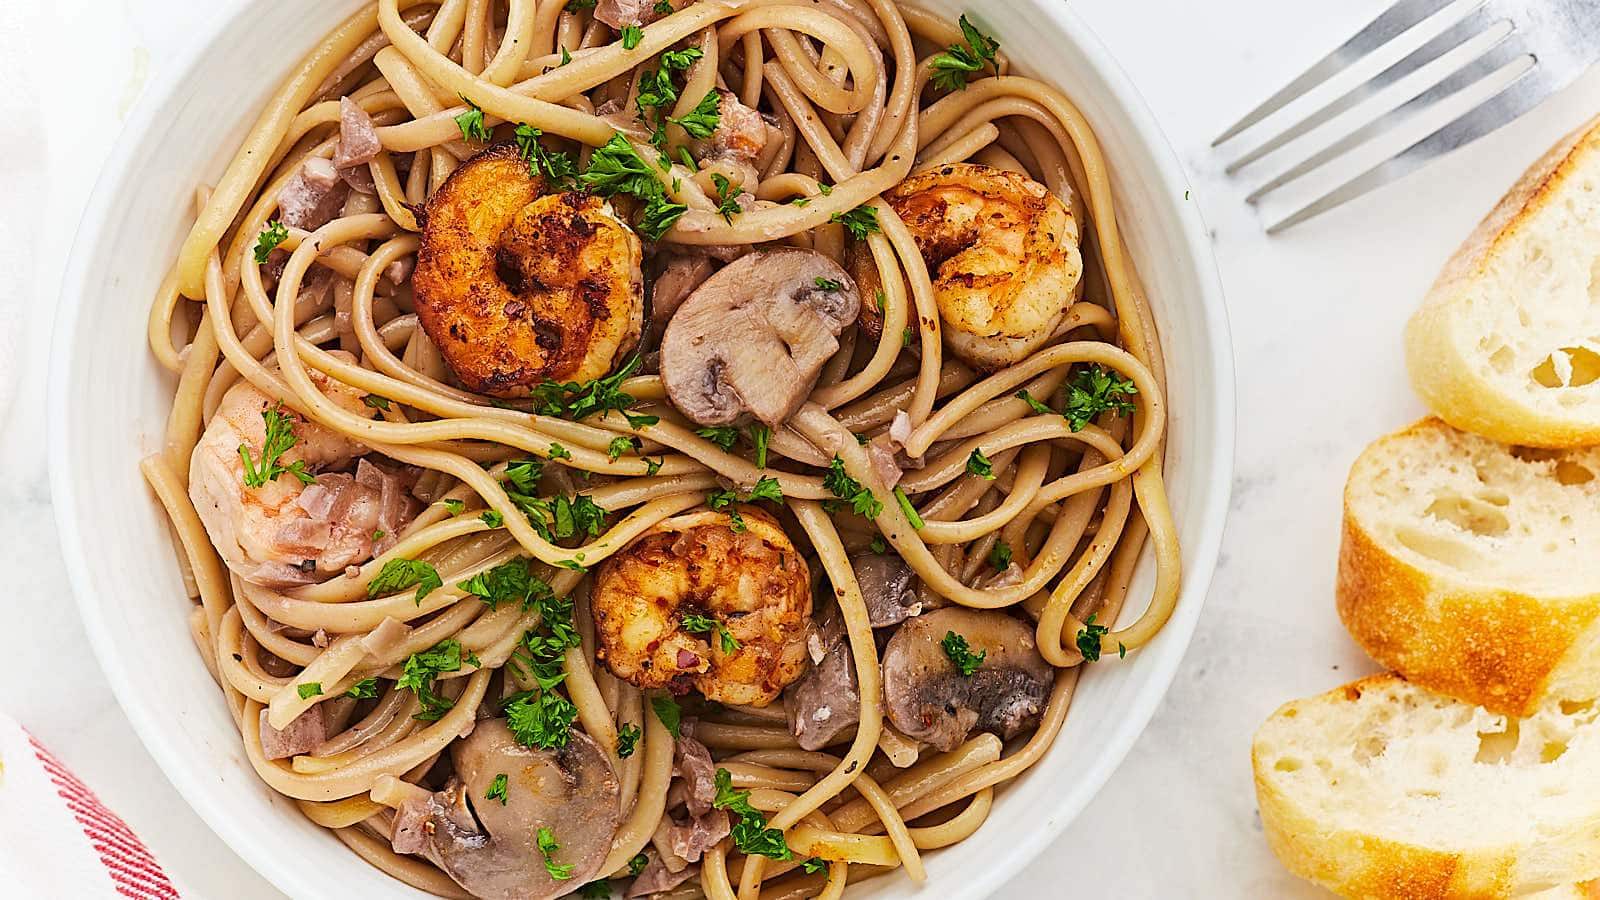 Shrimp and Mushroom Pasta recipe by Cheerful Cook.